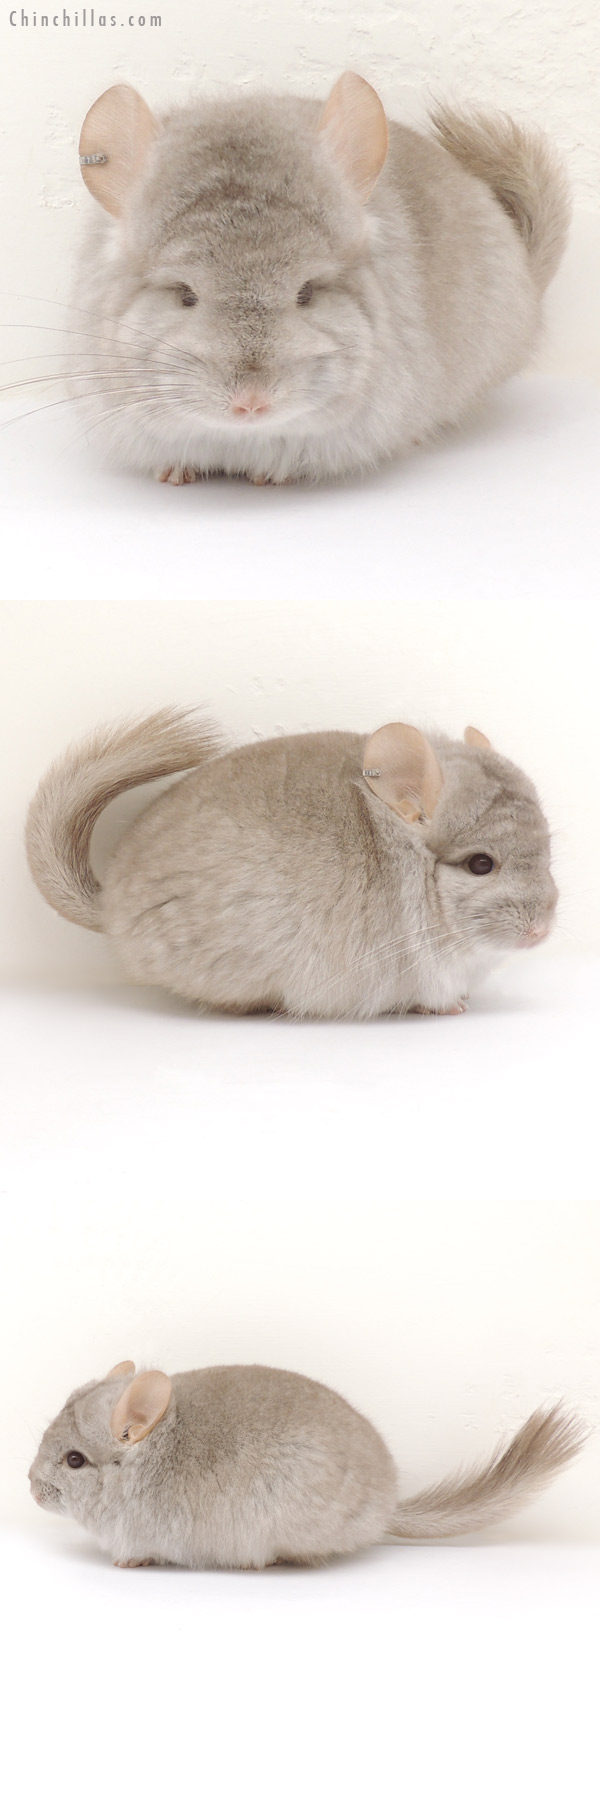 Chinchilla or related item offered for sale or export on Chinchillas.com - 13392 Beige Royal Persian Angora Female Chinchilla